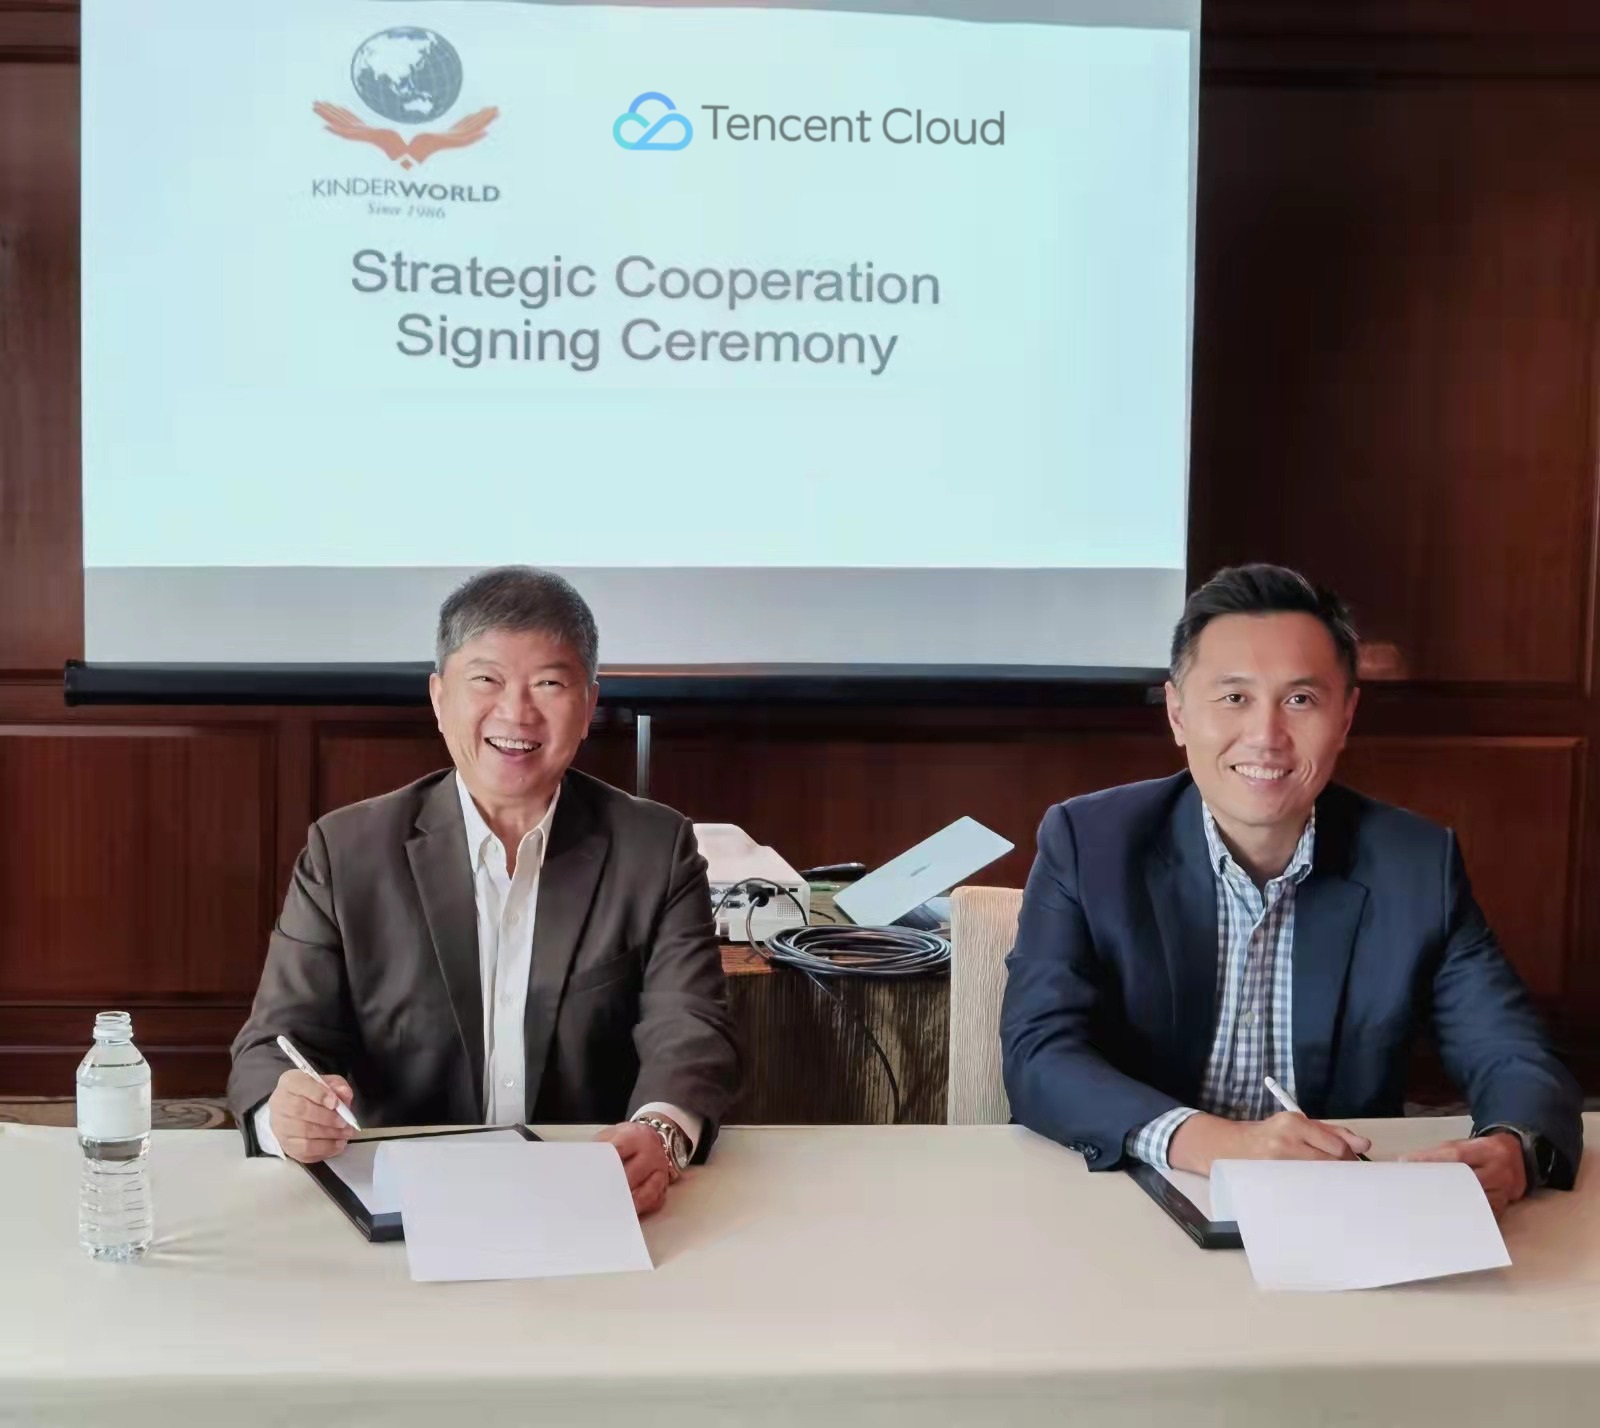 (Left: Ricky Tan, chairman and chief executive officer at KinderWorld International Group; Right: Kenneth Siow, regional director for Southeast Asia and general manager for Singapore, Malaysia and Indonesia, Tencent Cloud International